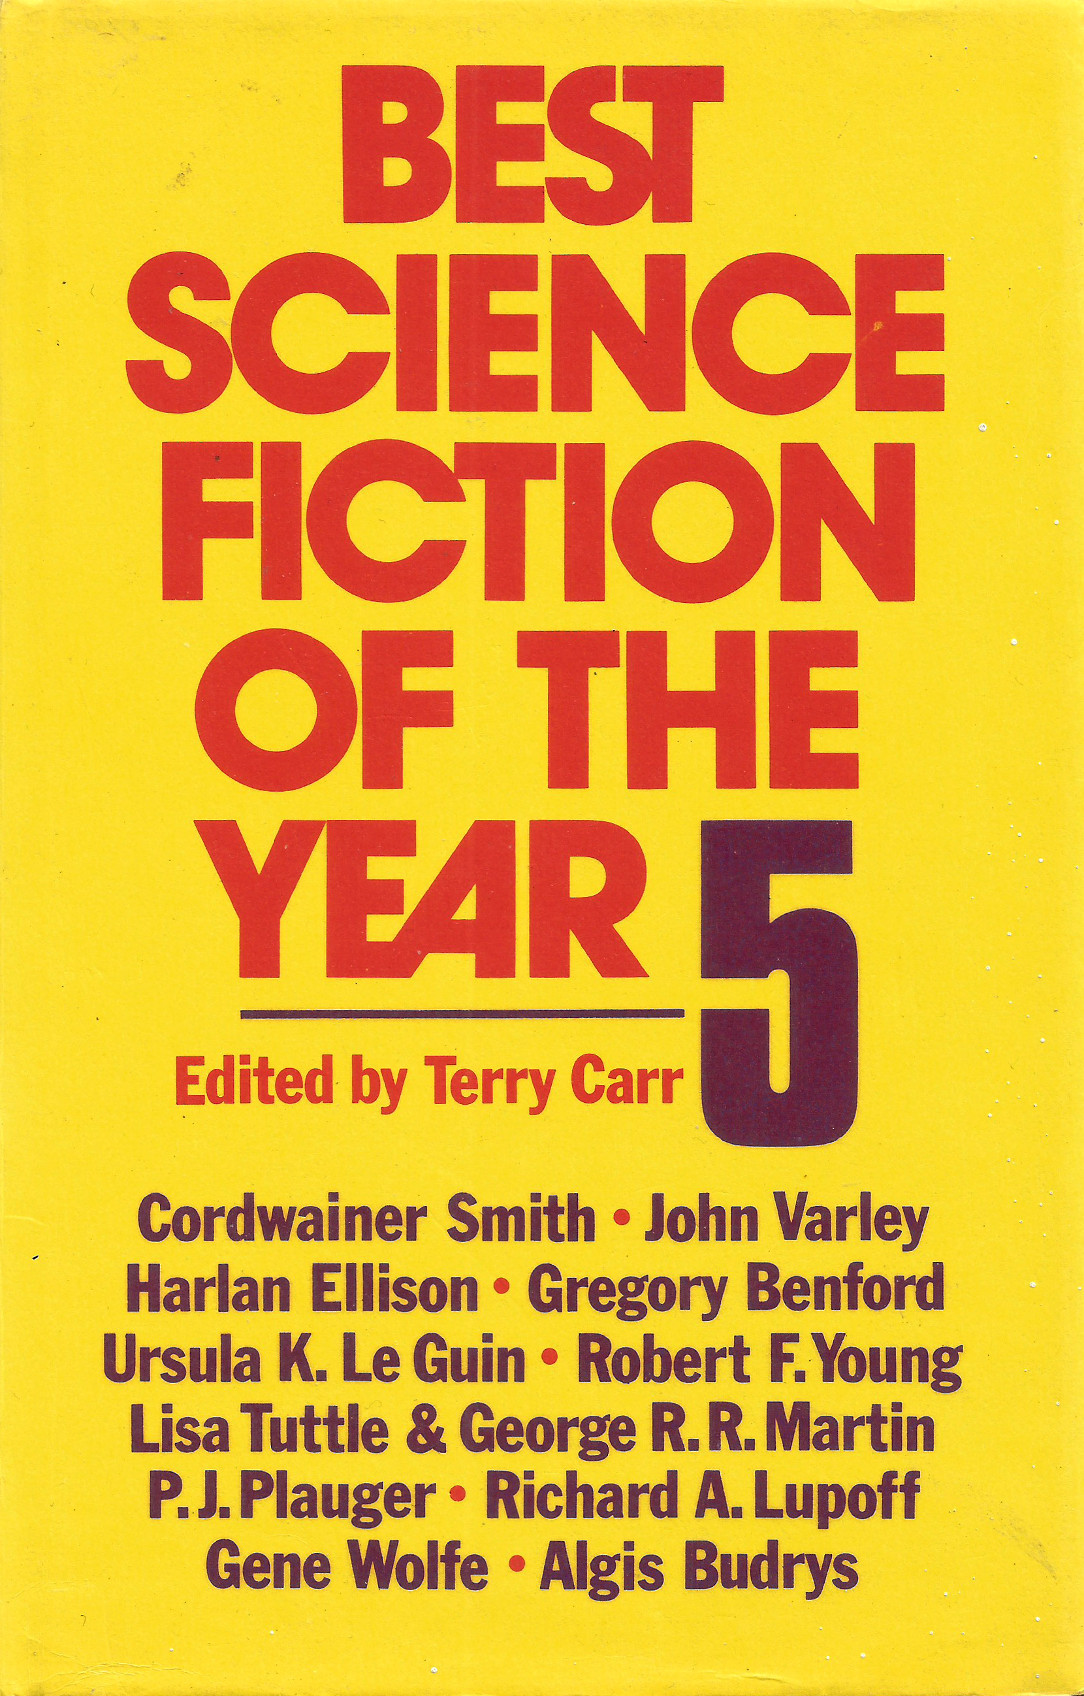 Best Science Fiction Of The Year 5, edited by Terry Carr (Book Club Associates, 1977).From